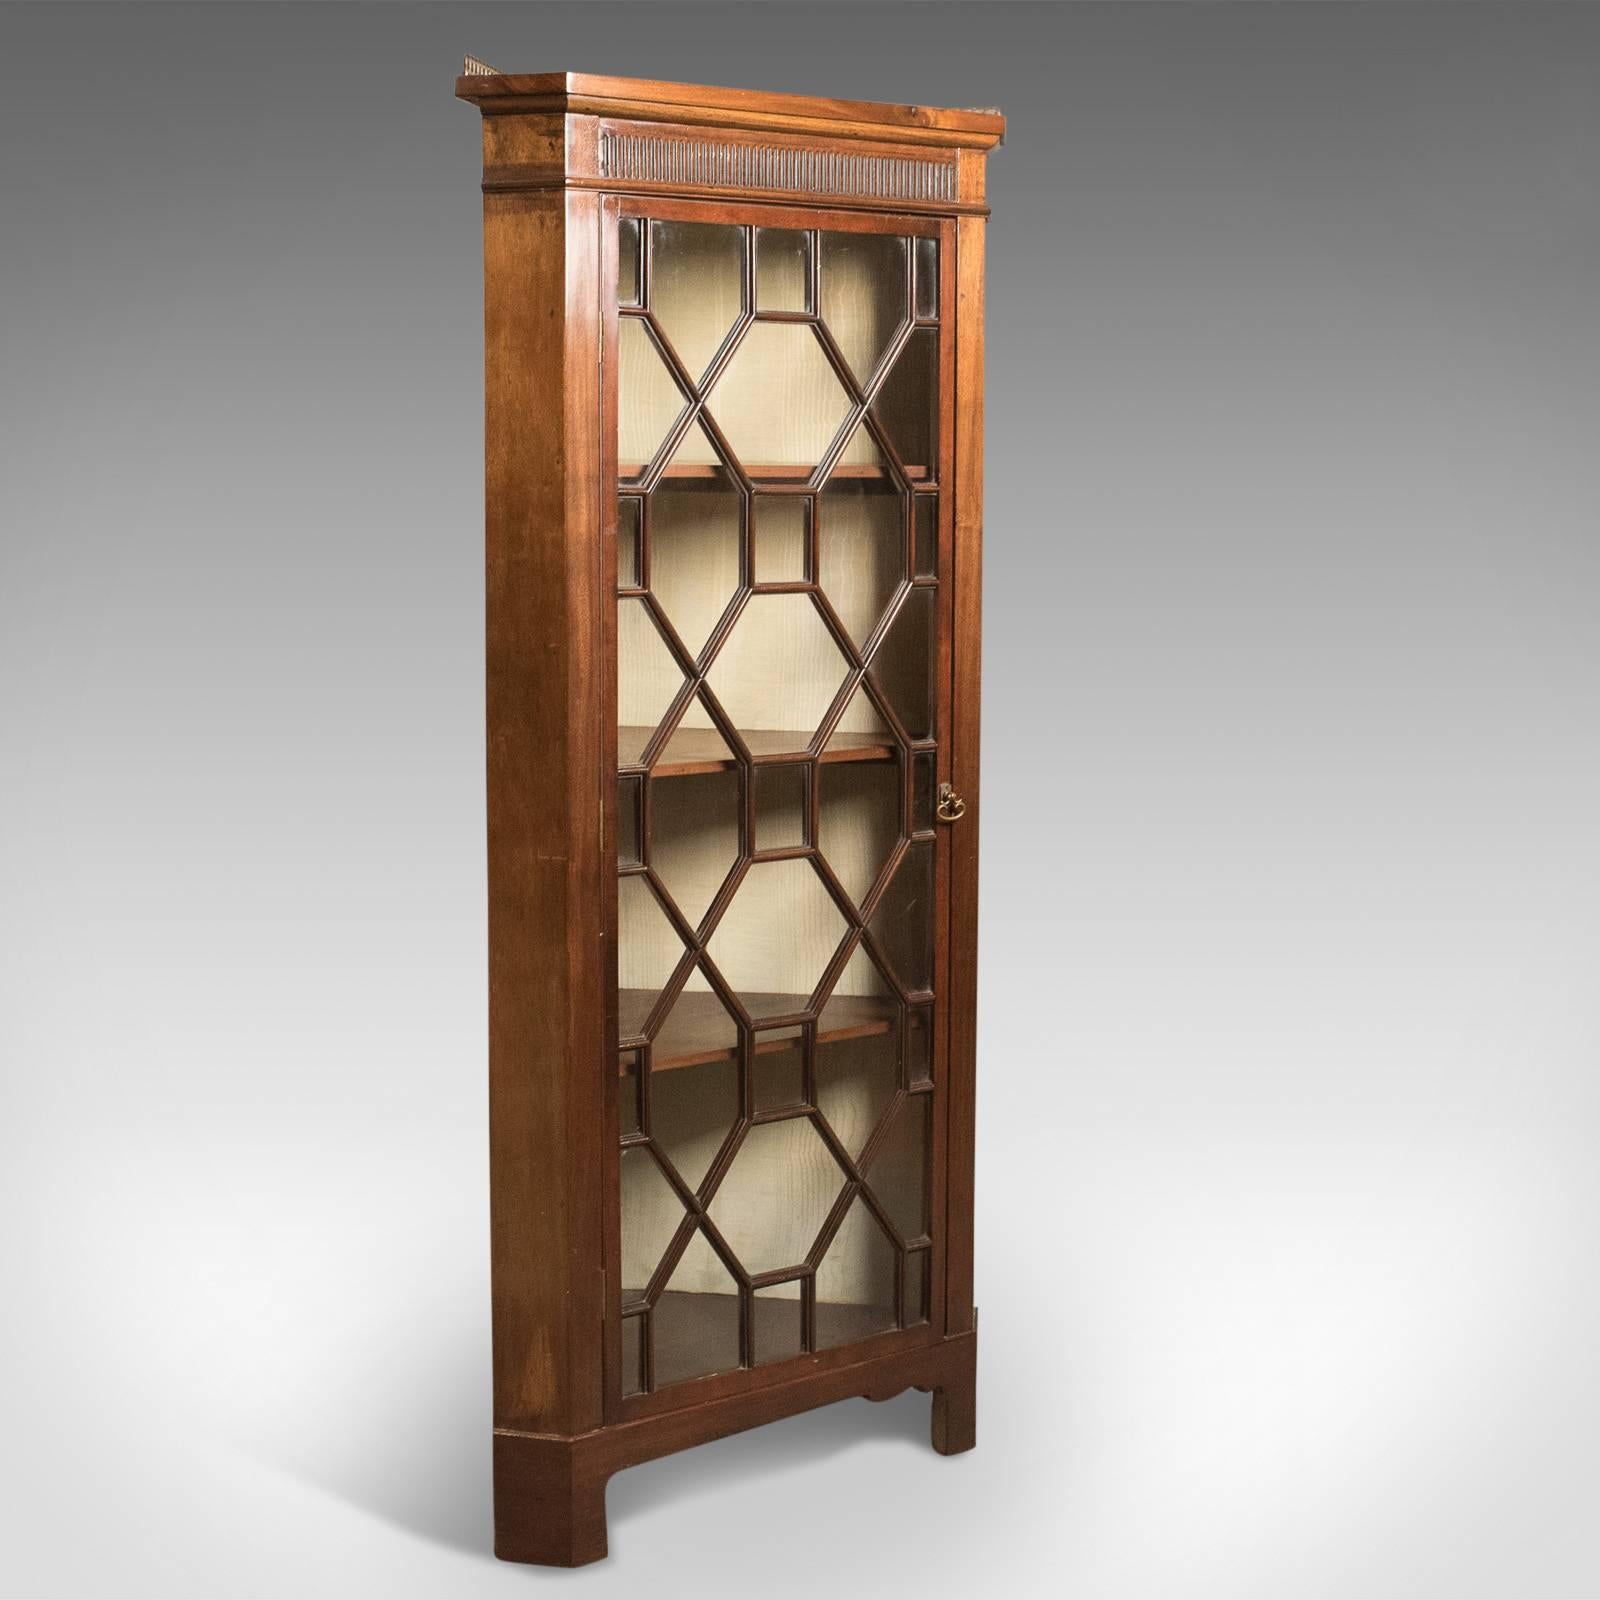 This is an Edwardian antique glazed display corner cabinet, English dating to circa 1910.

Standing just under 5 feet tall this delightful cabinet is in first class order
In mahogany with a deep rich lustre in the wax polished finish
Of good